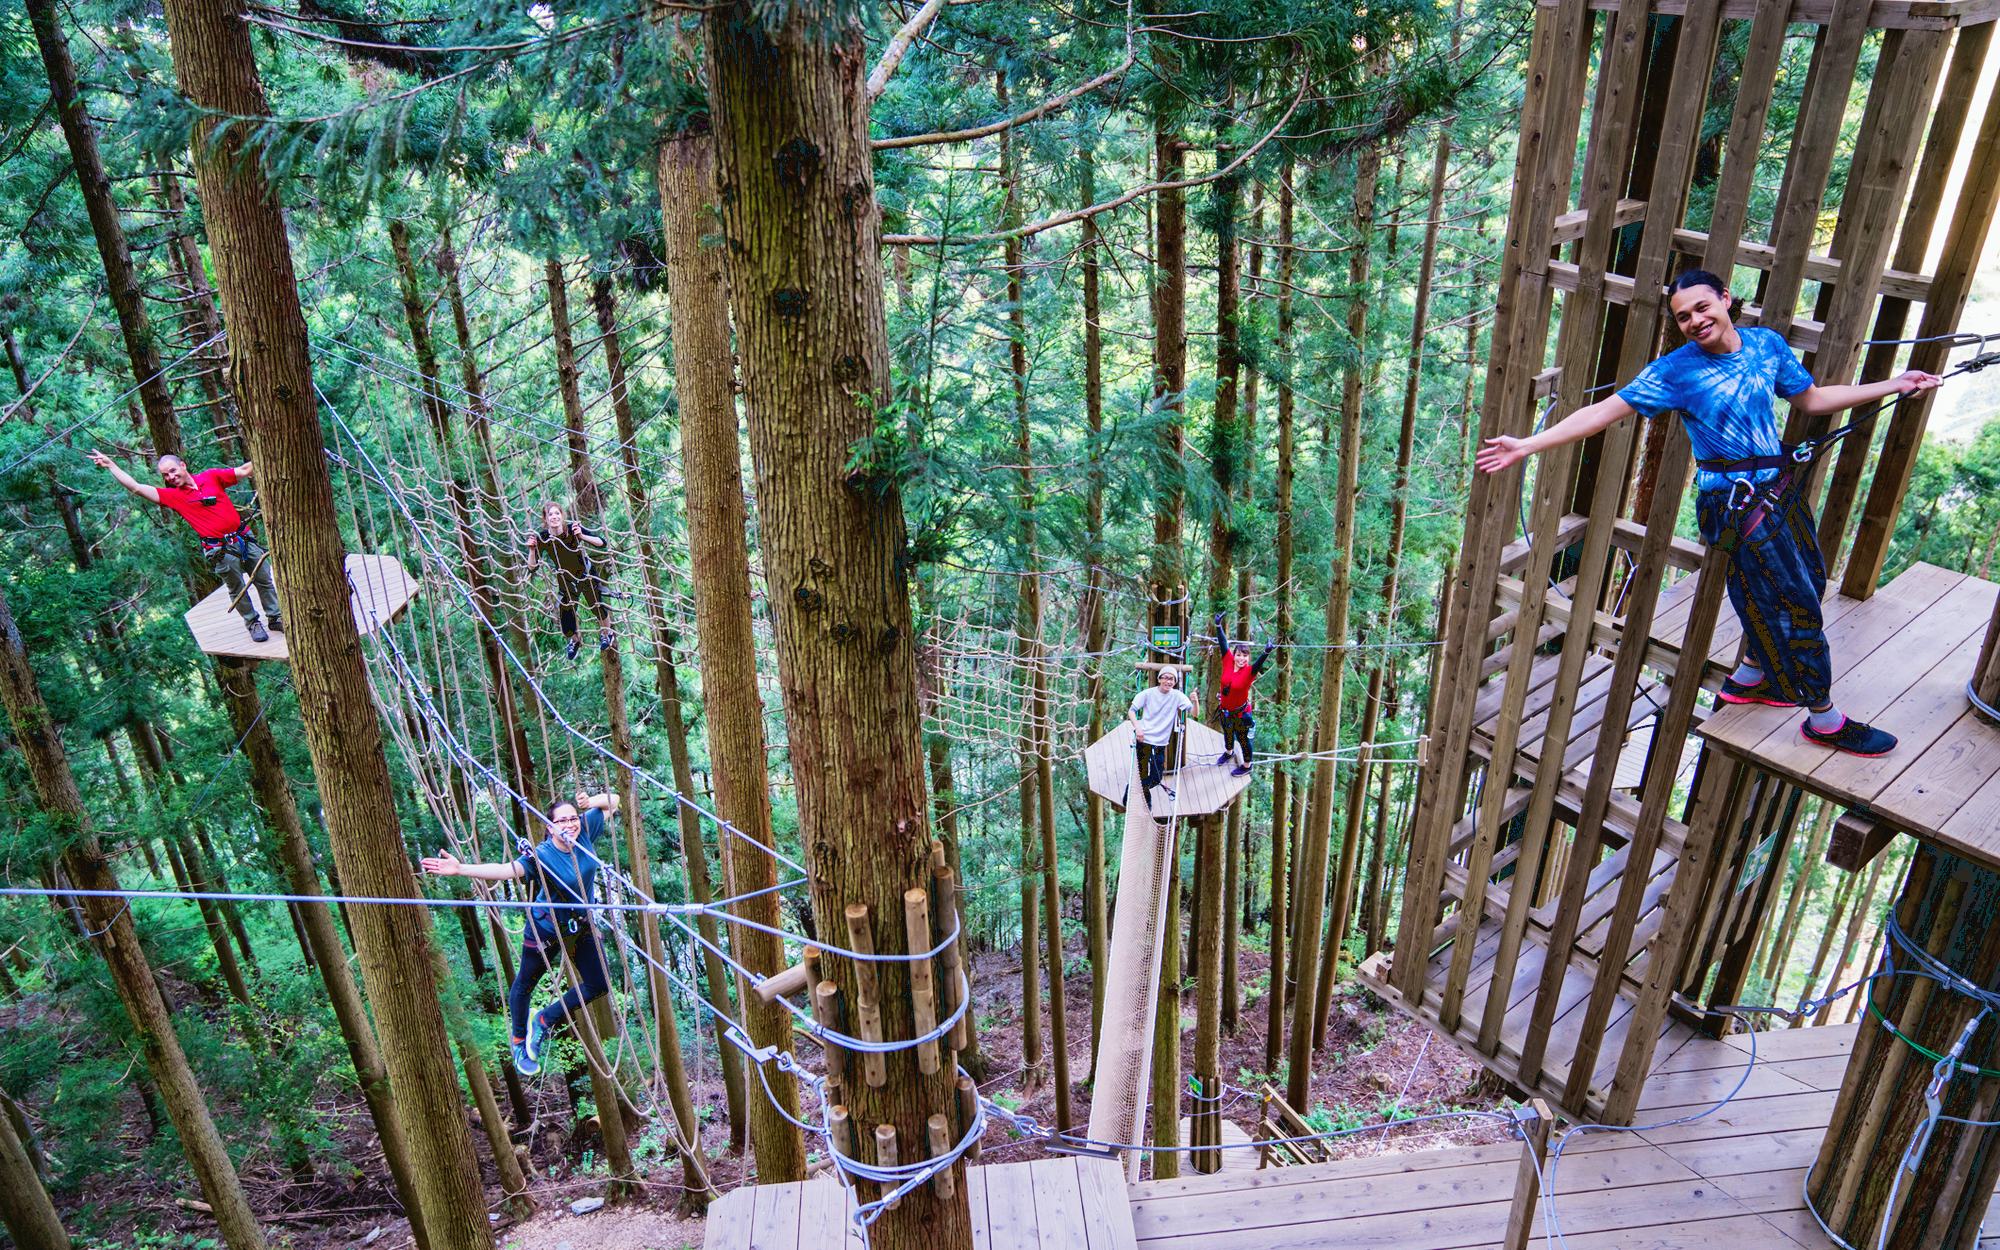 Teambuilding activities that work best for corporate groups high ropes